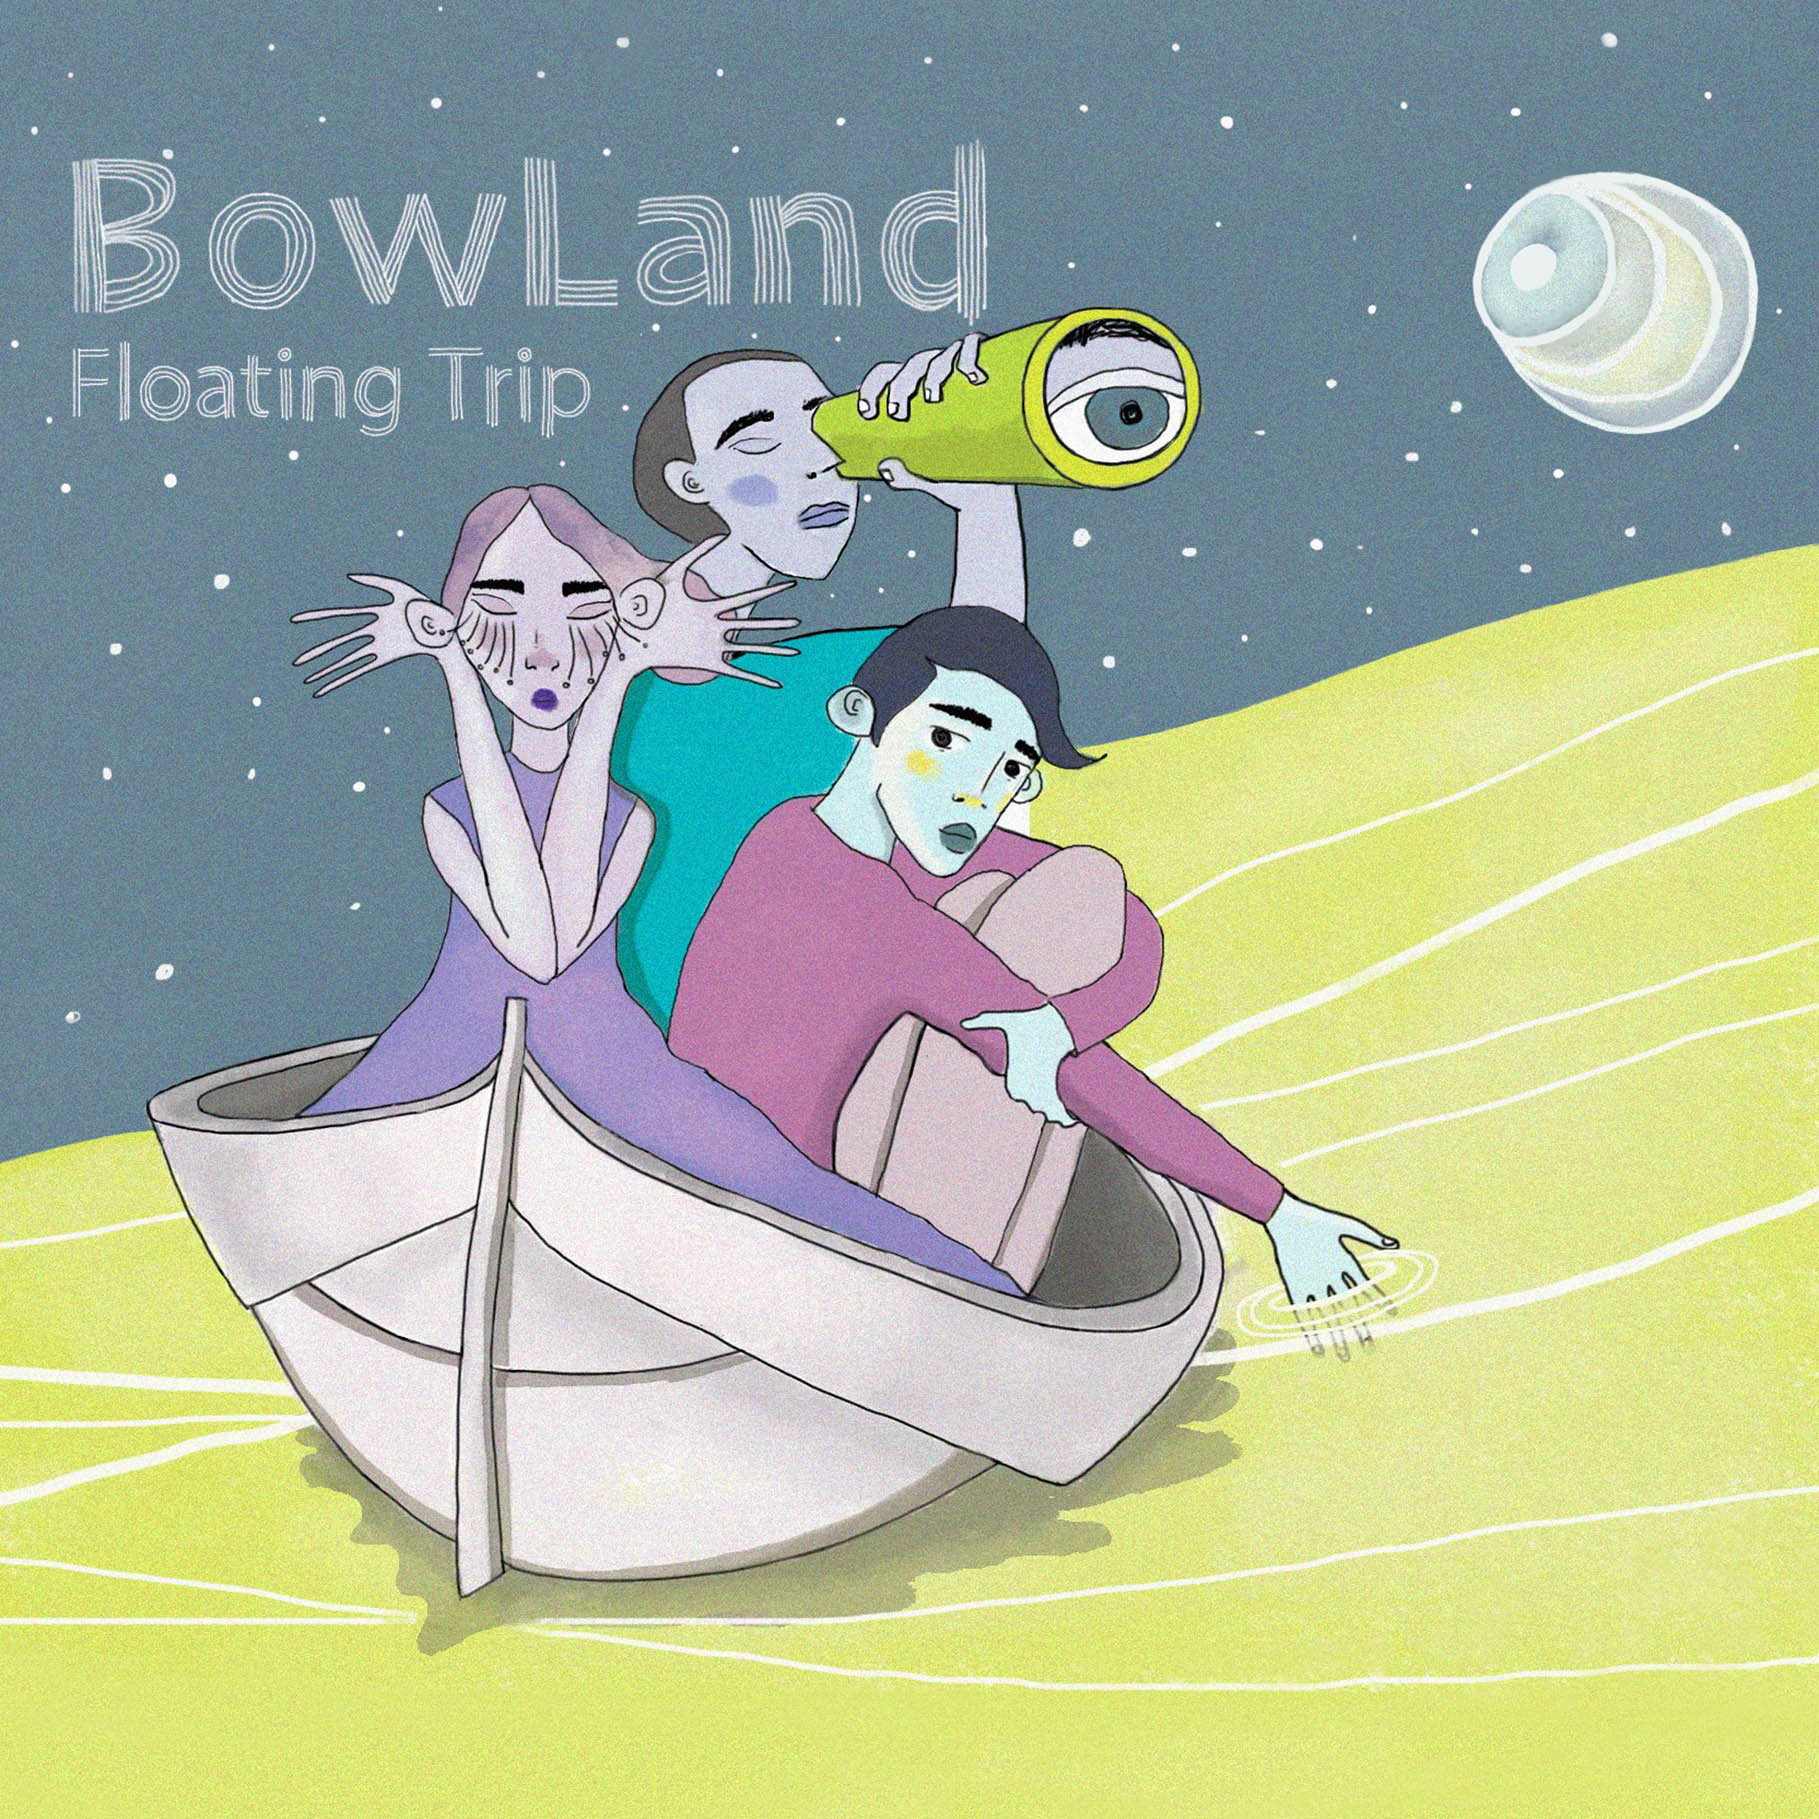 The cover of "Floating Trip", Bowland's debut album, by singer Lei Low